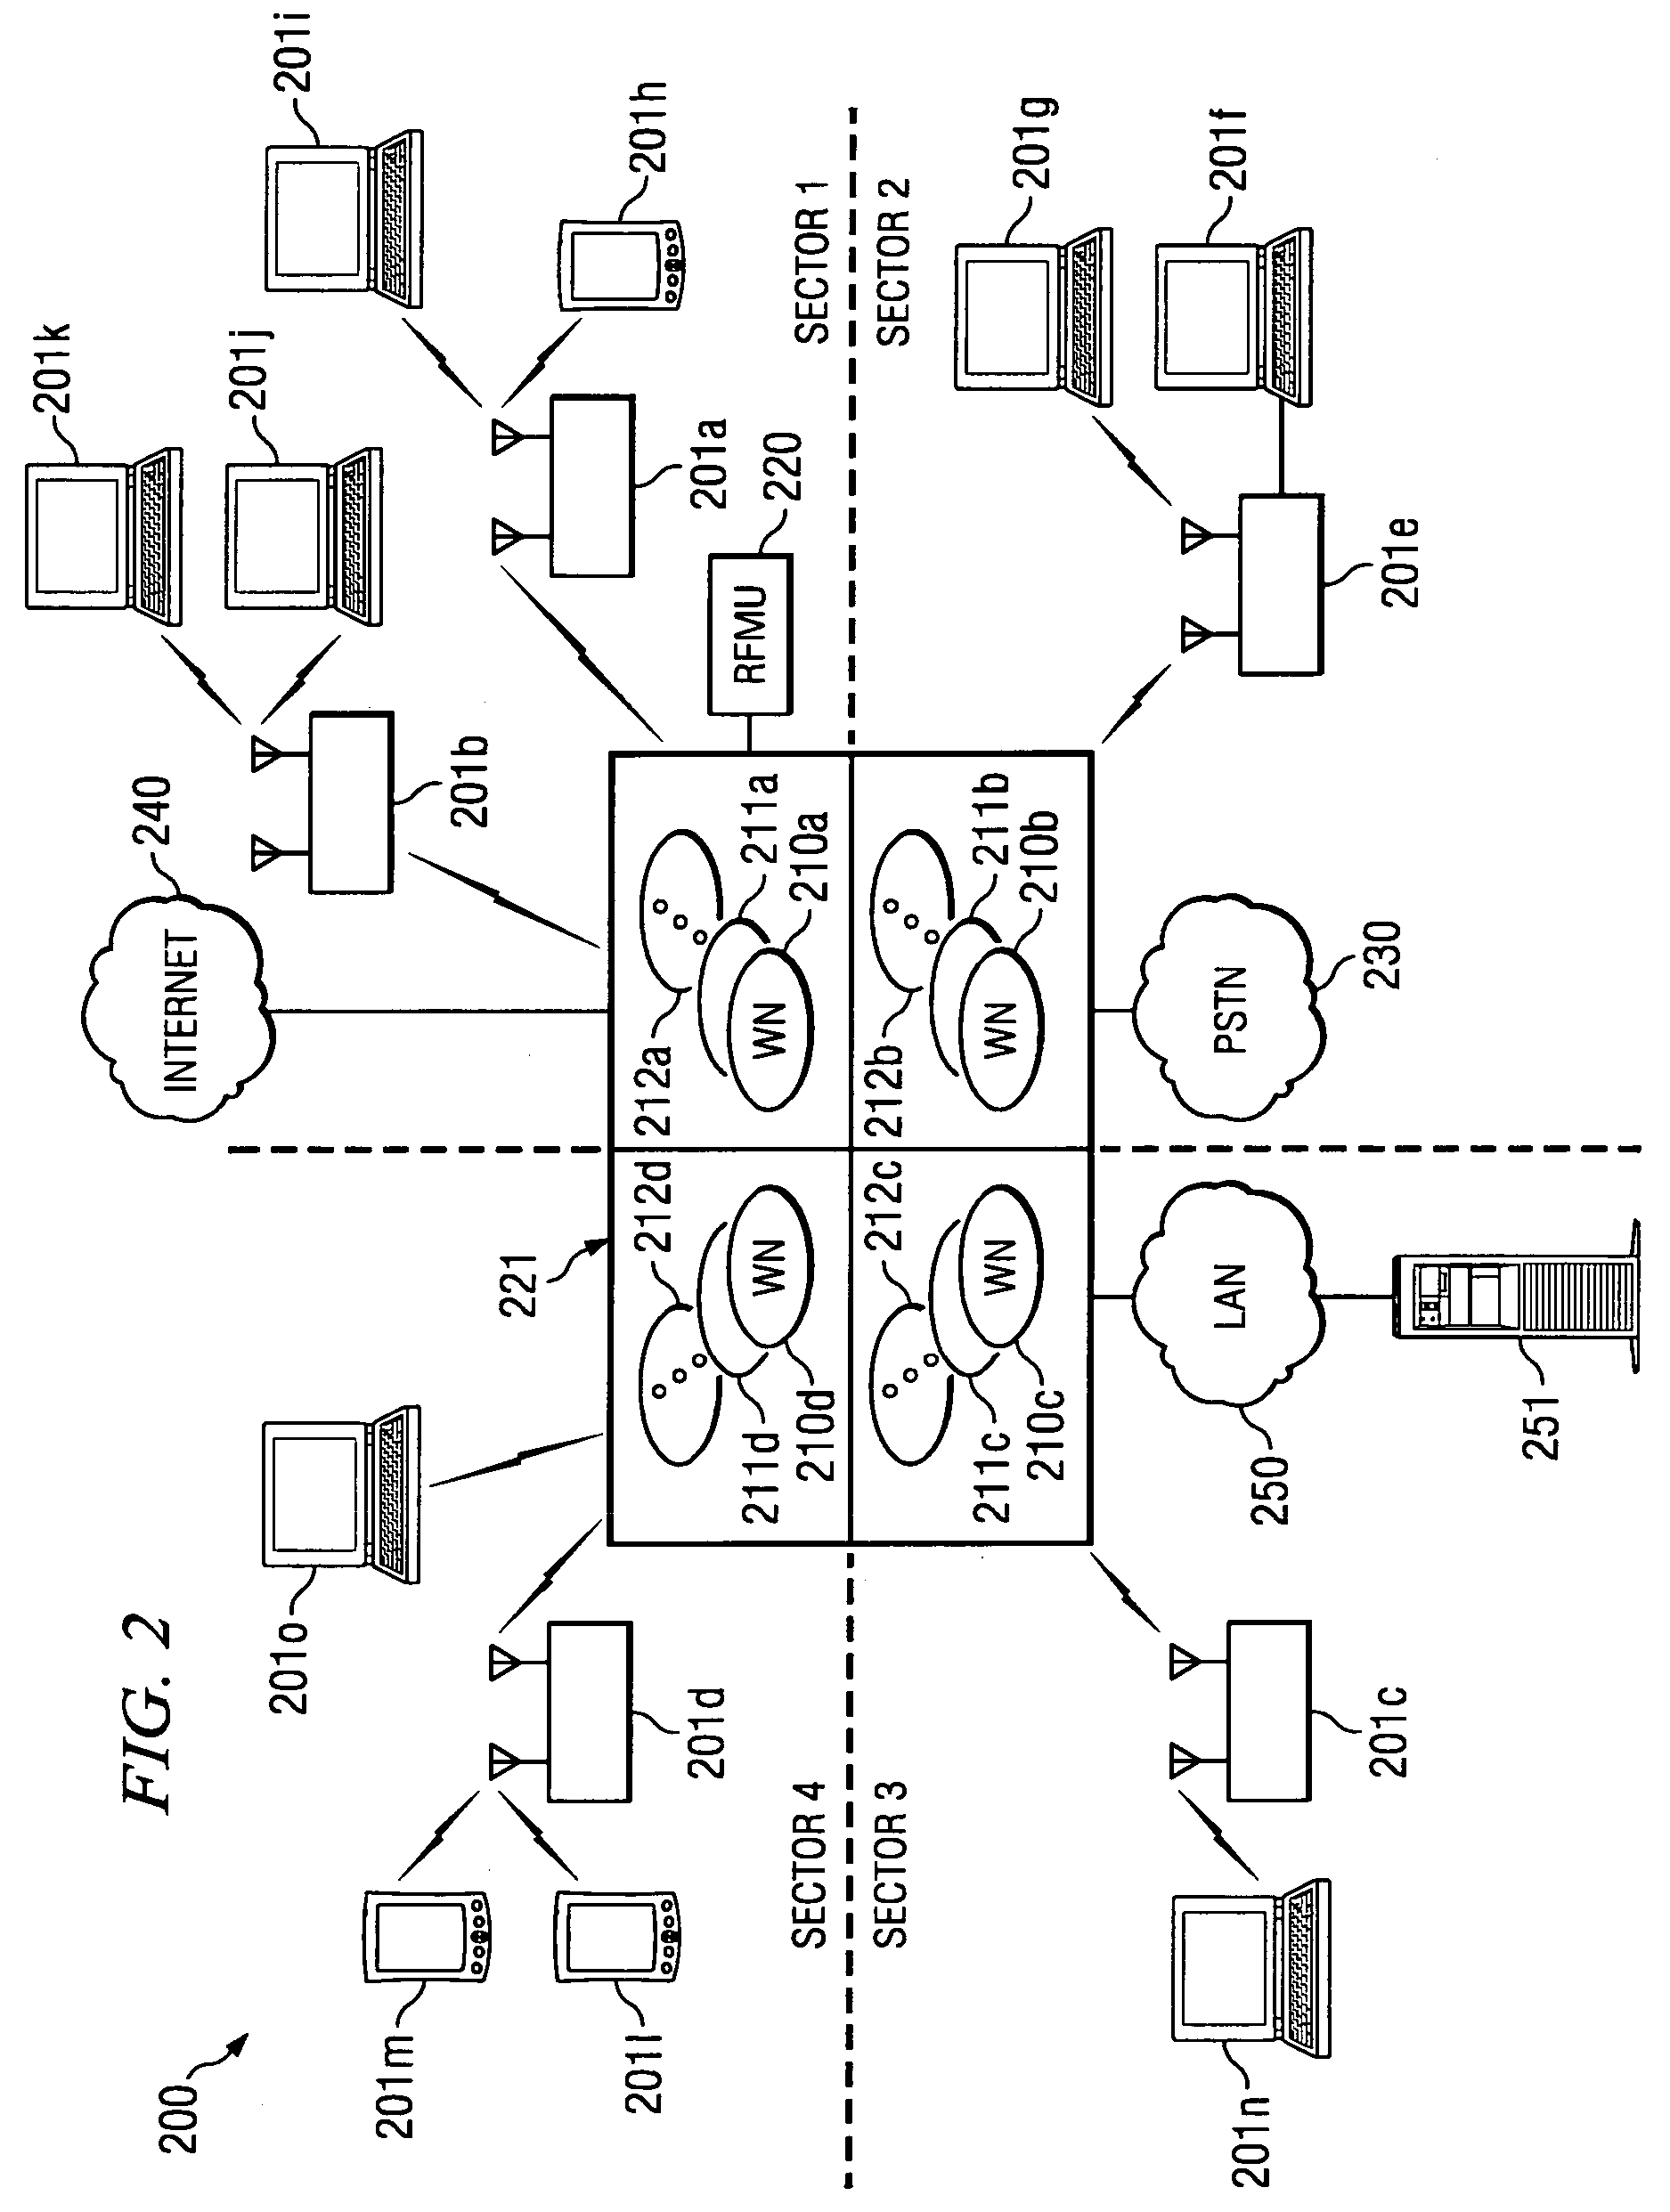 System and method for interference mitigation for wireless communication